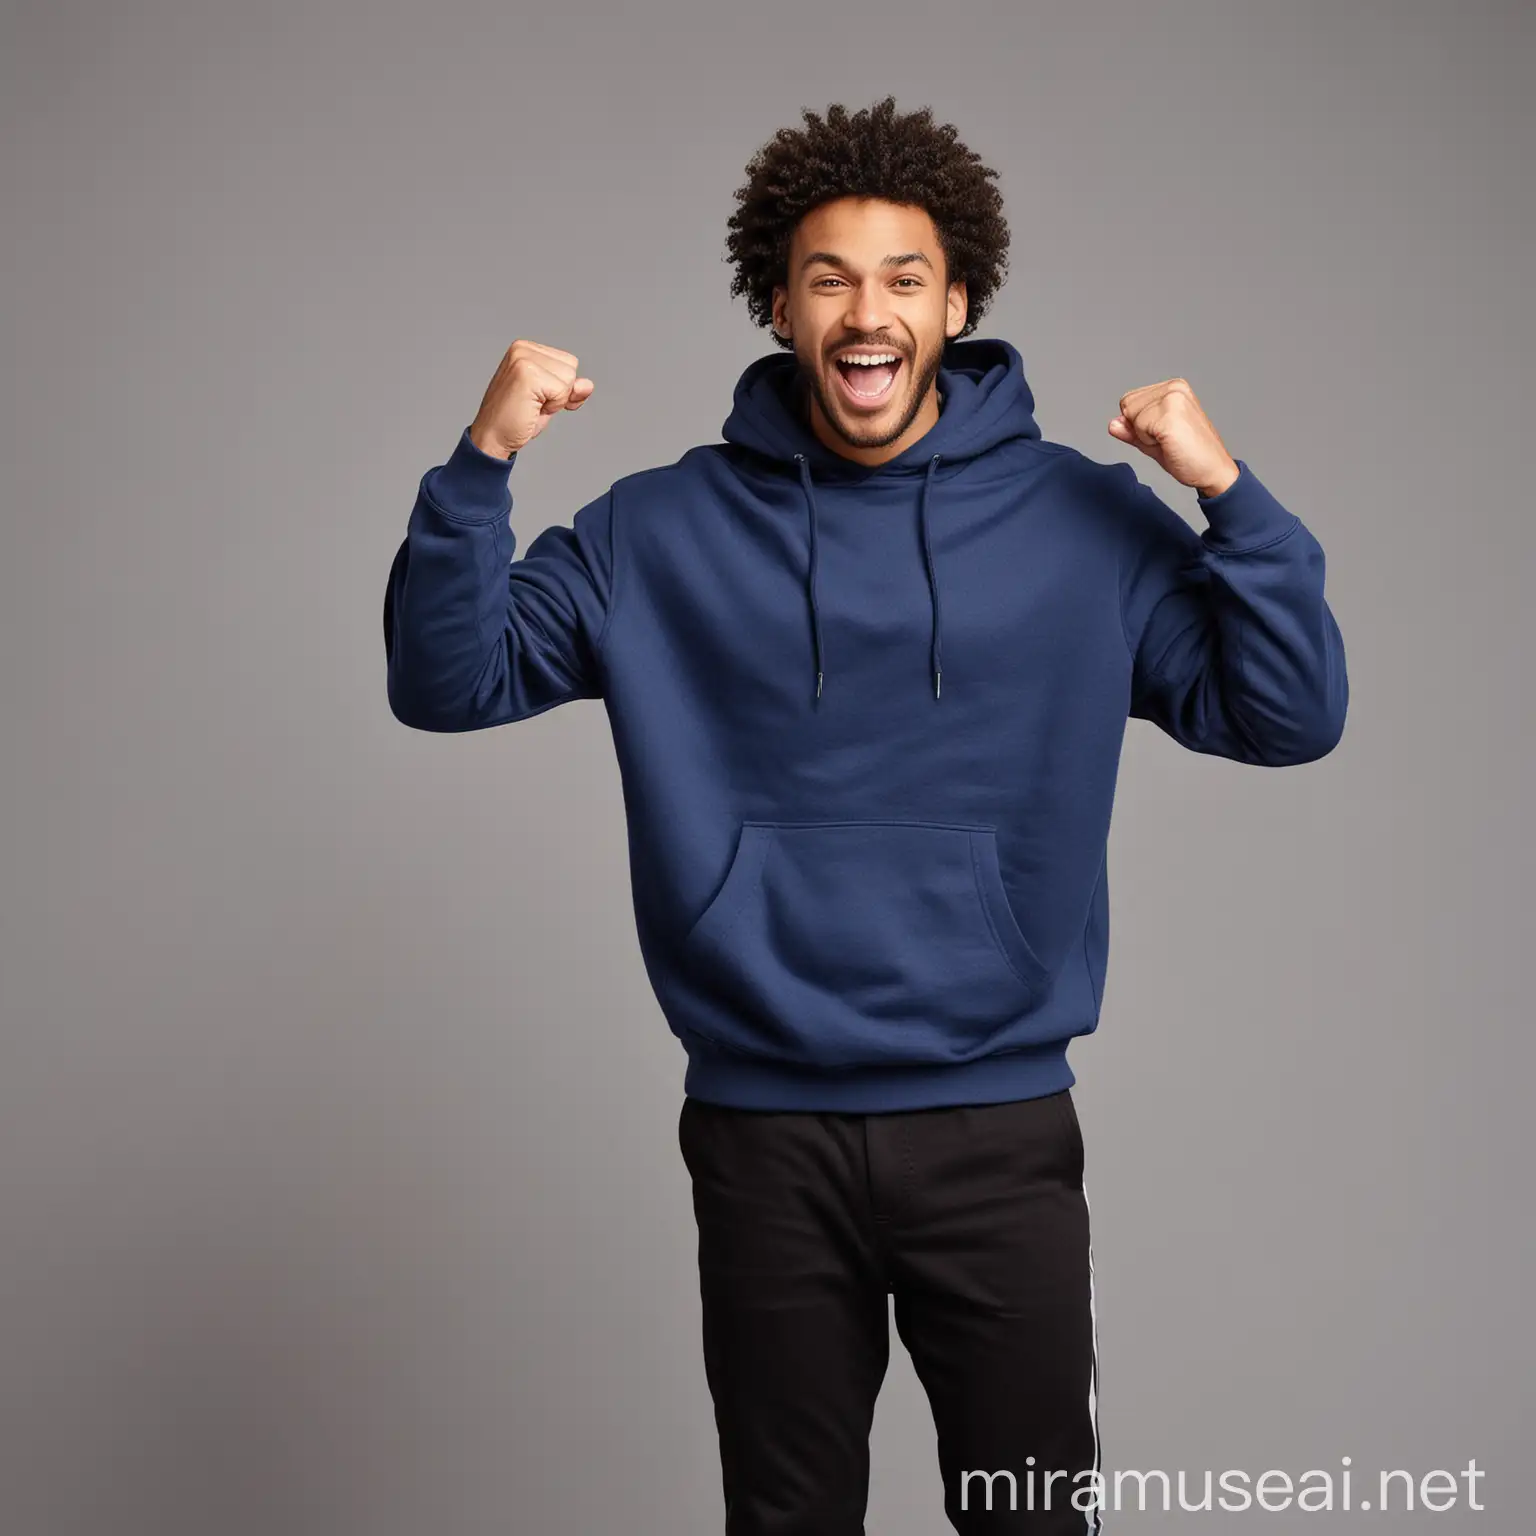 Excited  black curly guy cheerfully smiling, putting on dark blue sweatshirt and black pants , raising clenched fist up , shouting with energy to victory , standing against gray space , in front of camera